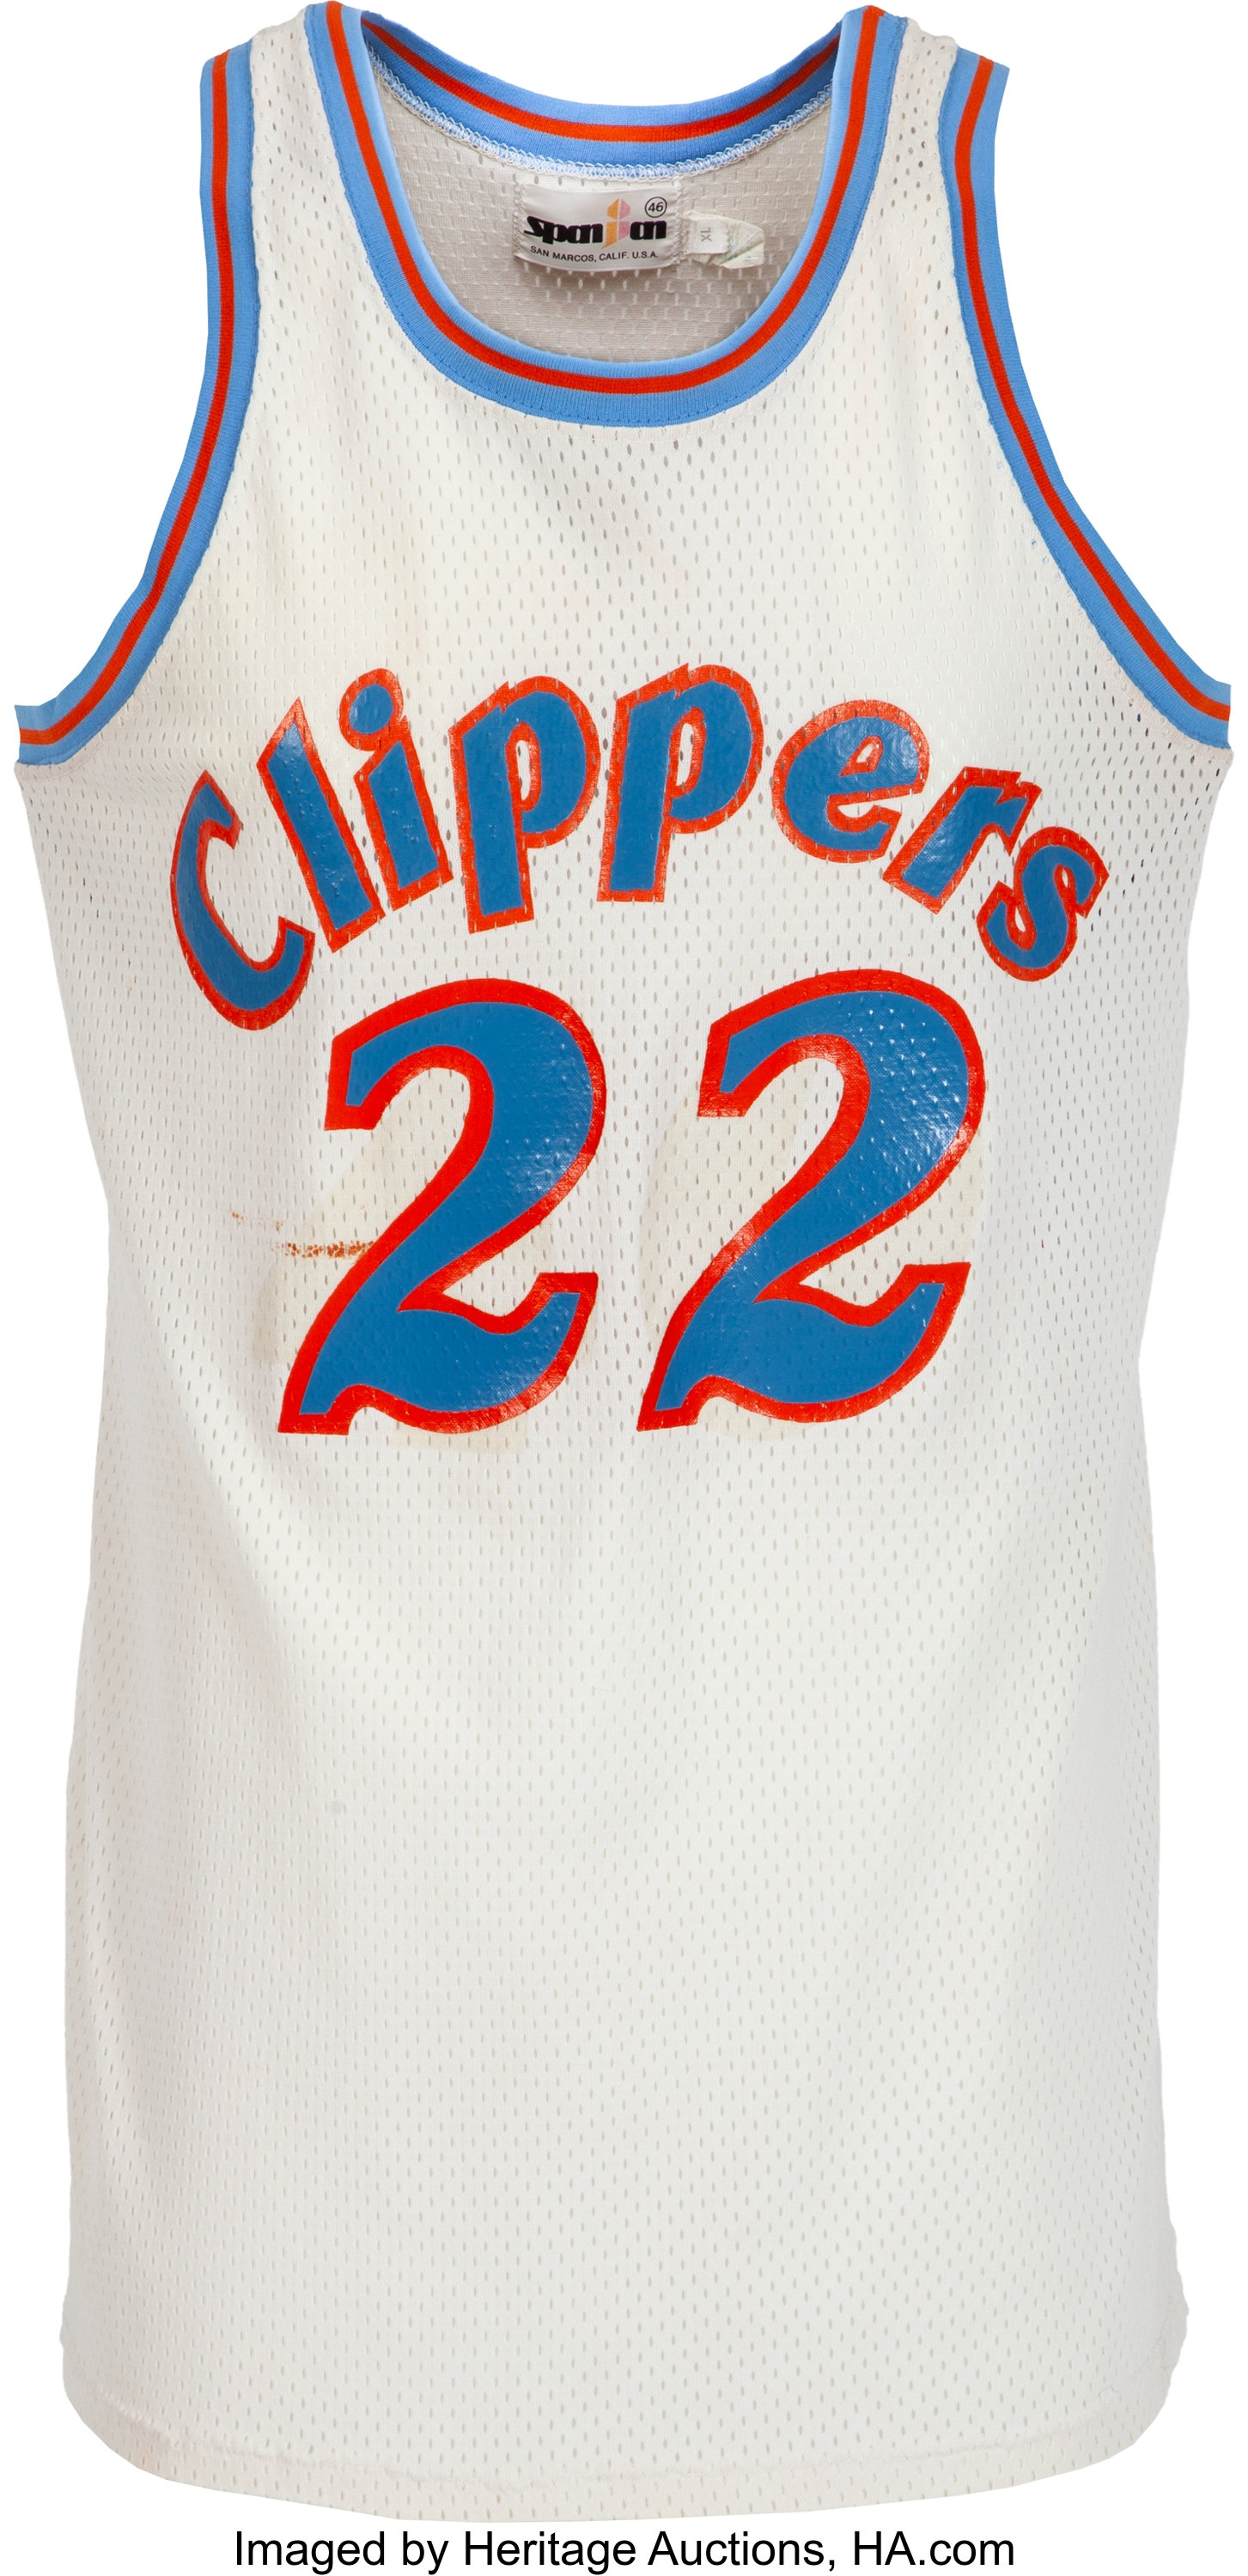 Clippers' new jersey inspired by San Diego era